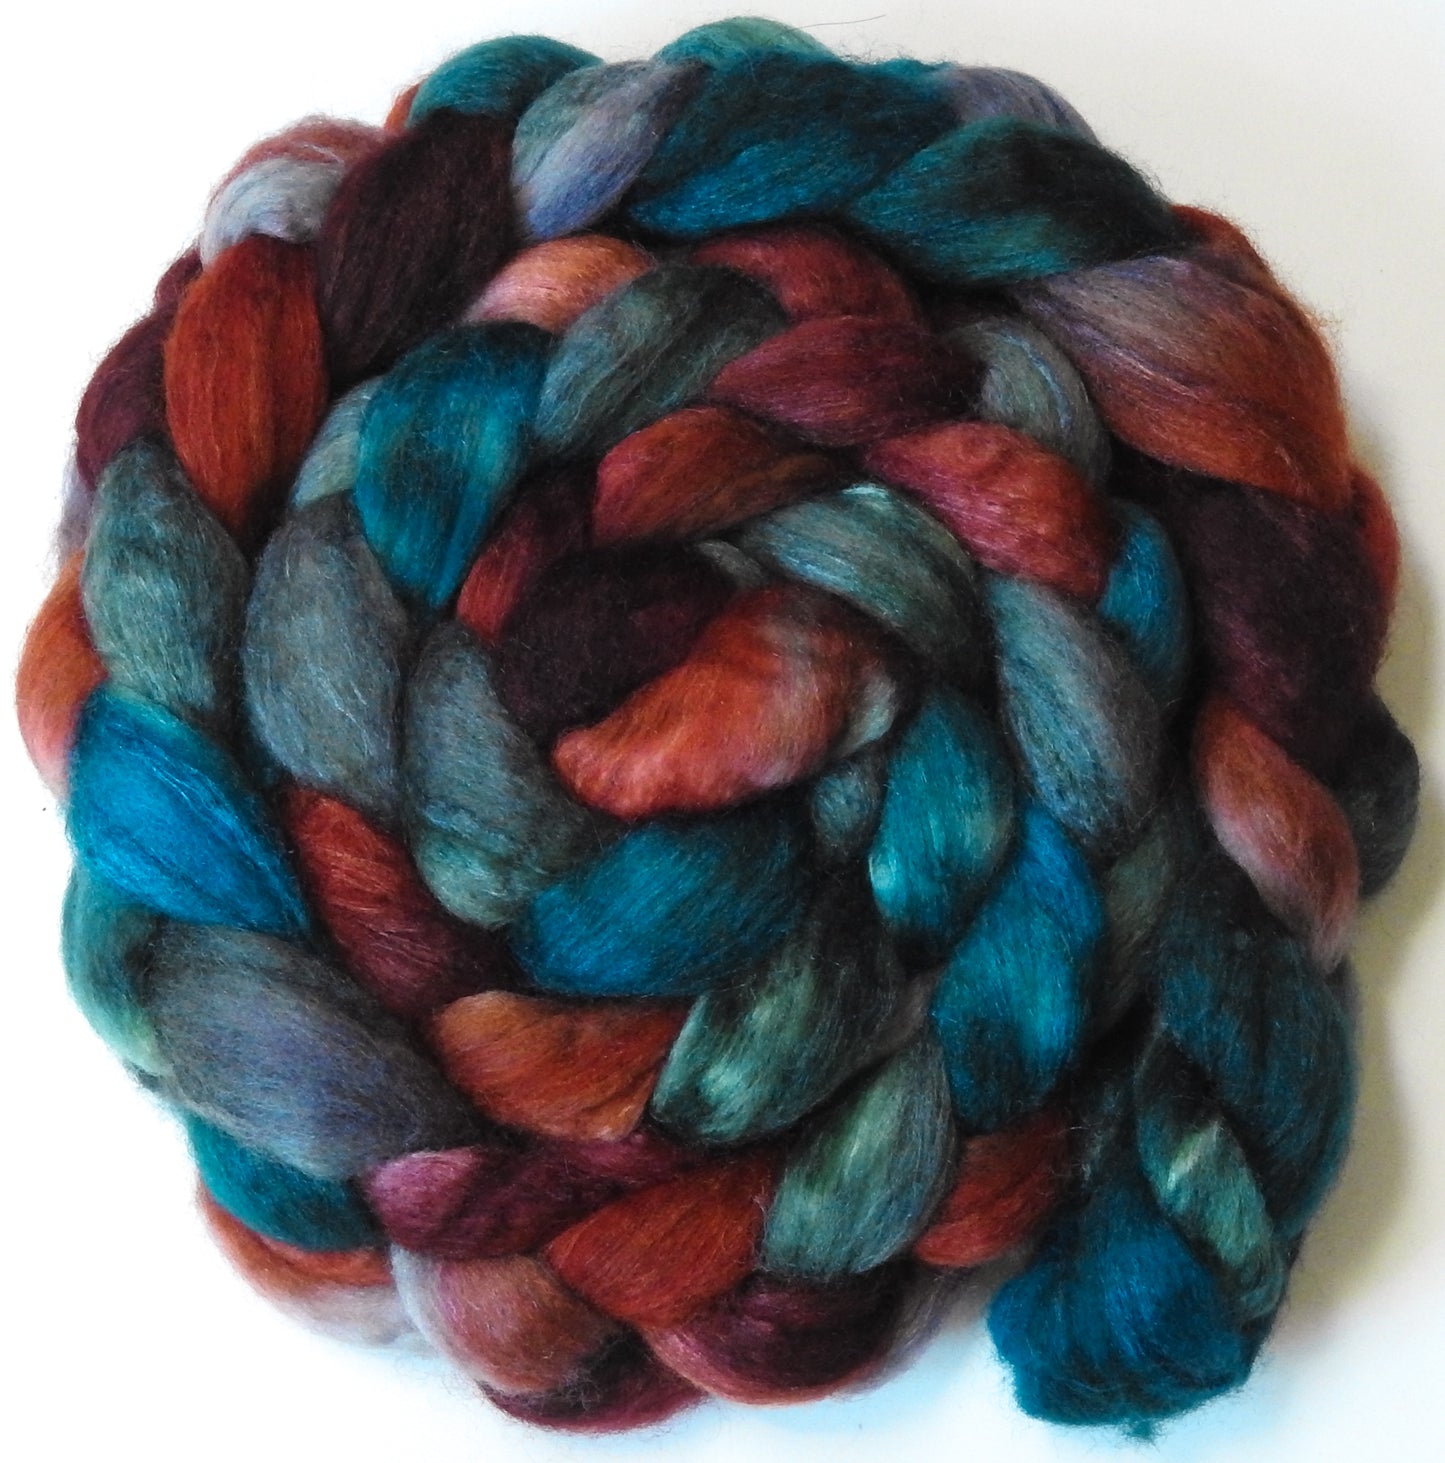 Flannel - Blue-faced Leicester/ Tussah Silk (75/25)